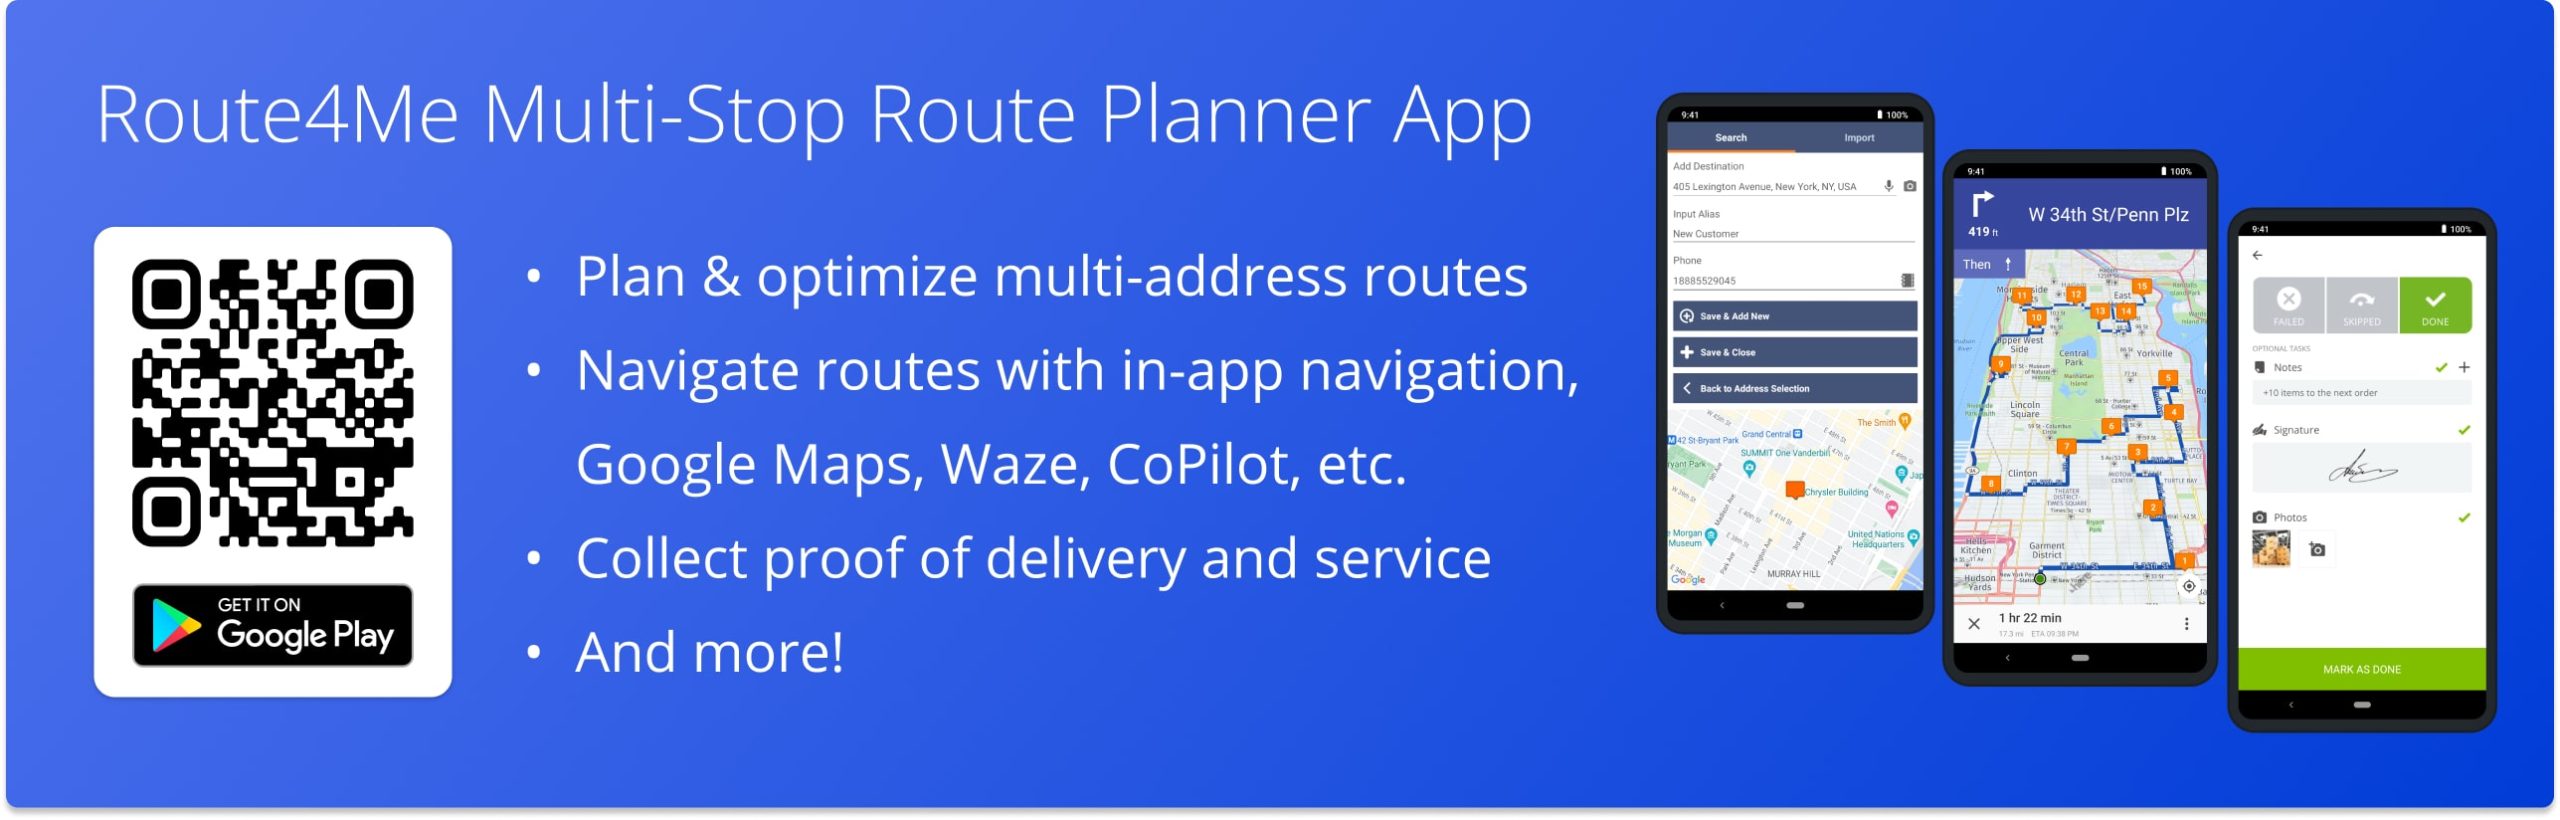 Download and install Route4Me's multi-stop route planner app for delivery drivers on Android phones and tablets.